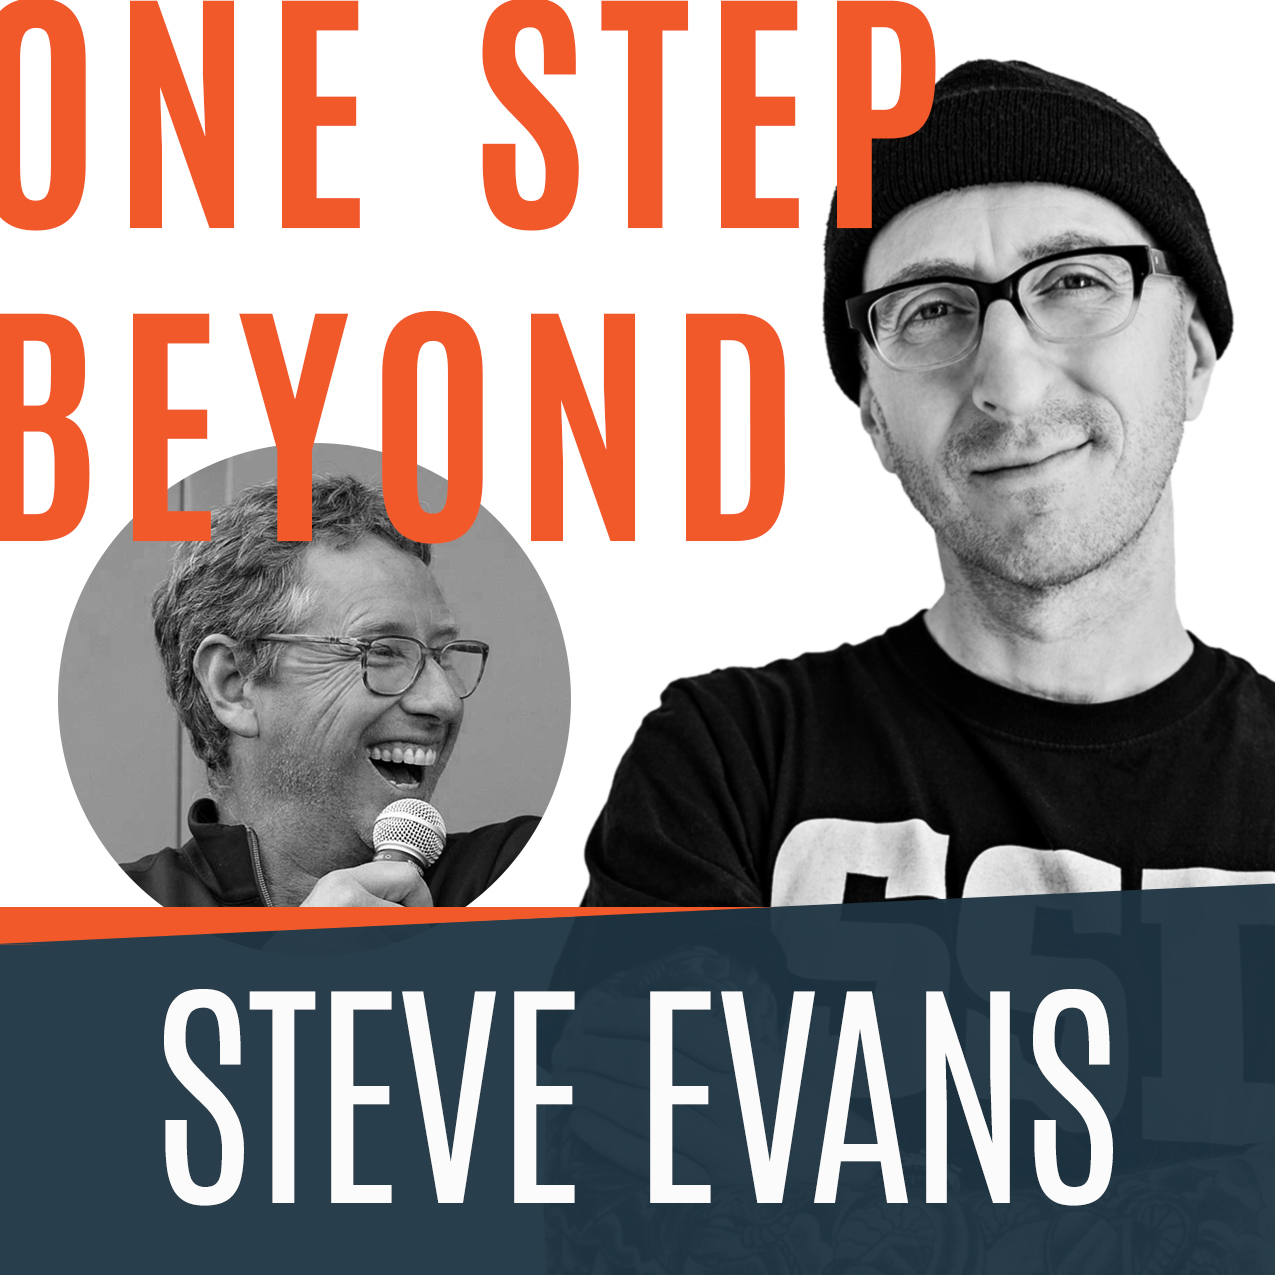 One Step Beyond Podcast Featuring Steve Evans of Show Imaging